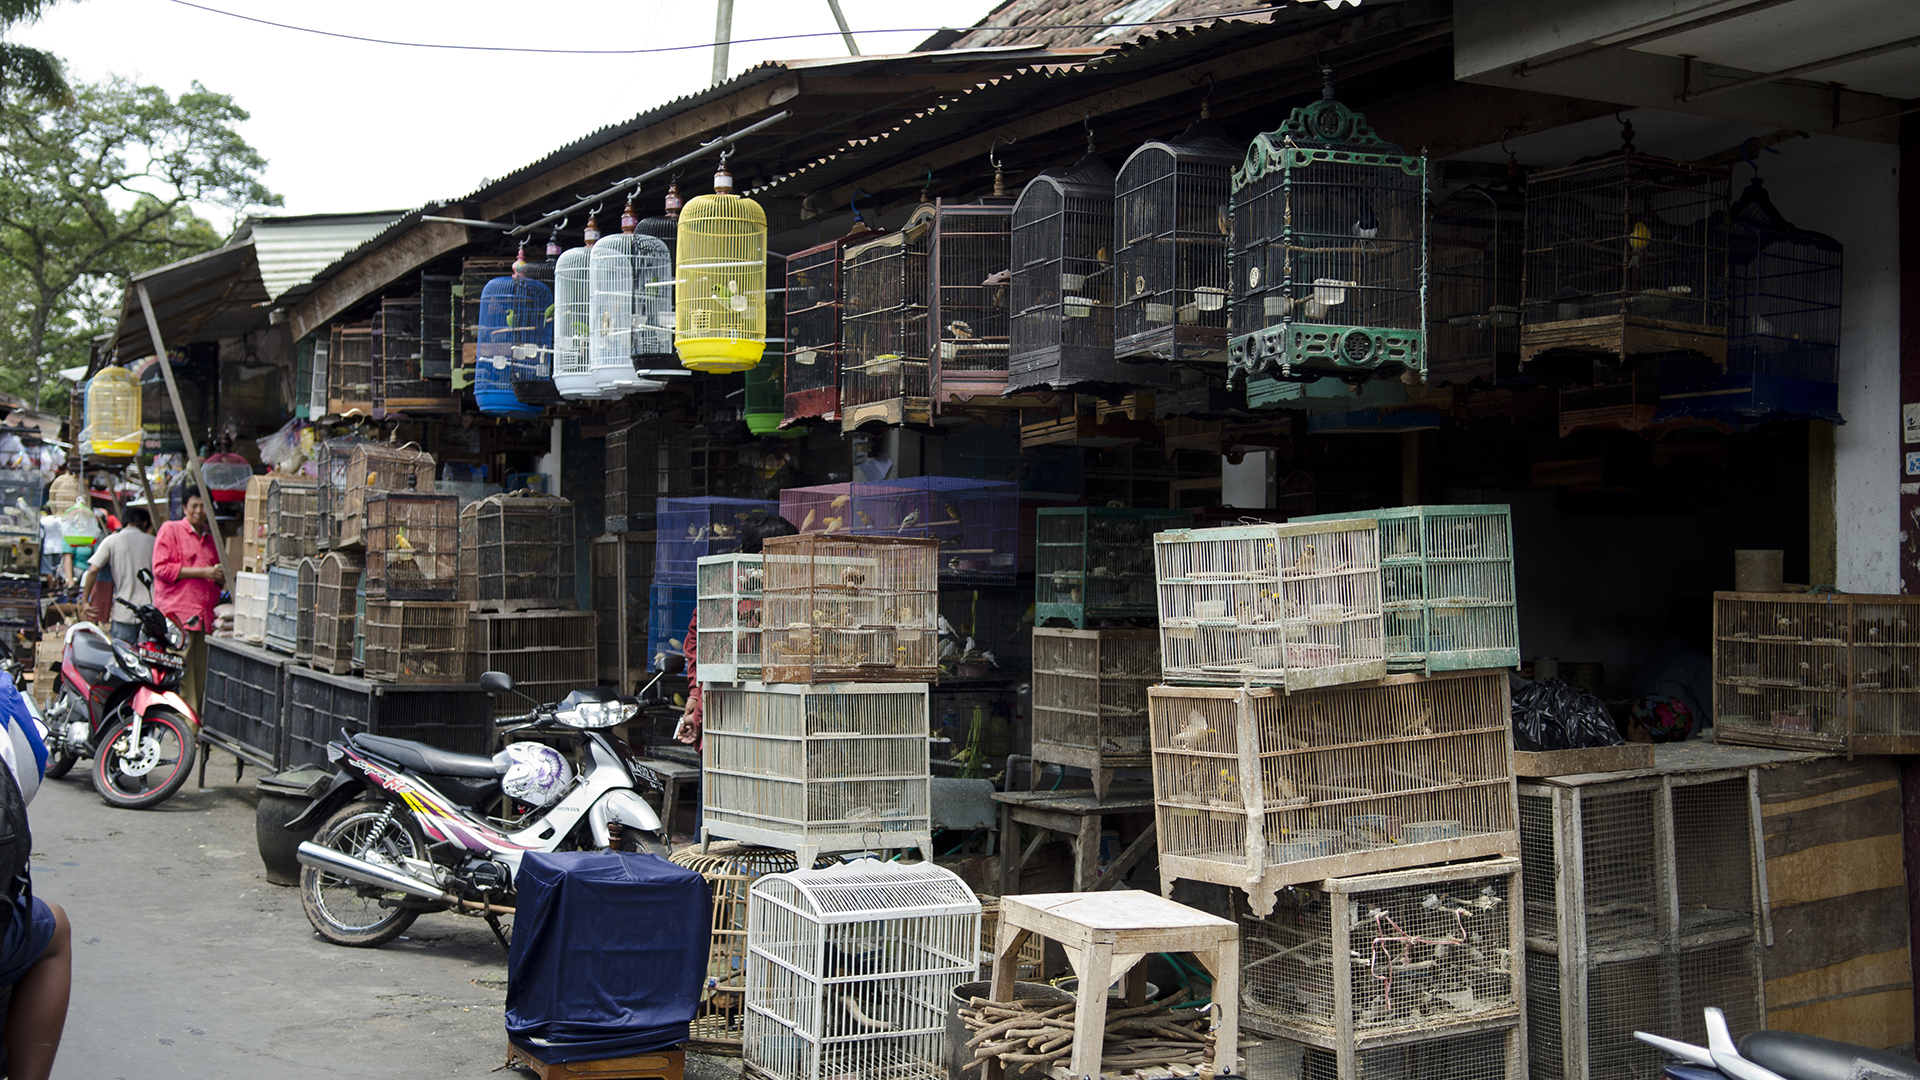 The Malang bird market, lots of cages of birds stacked on top of each other in the street